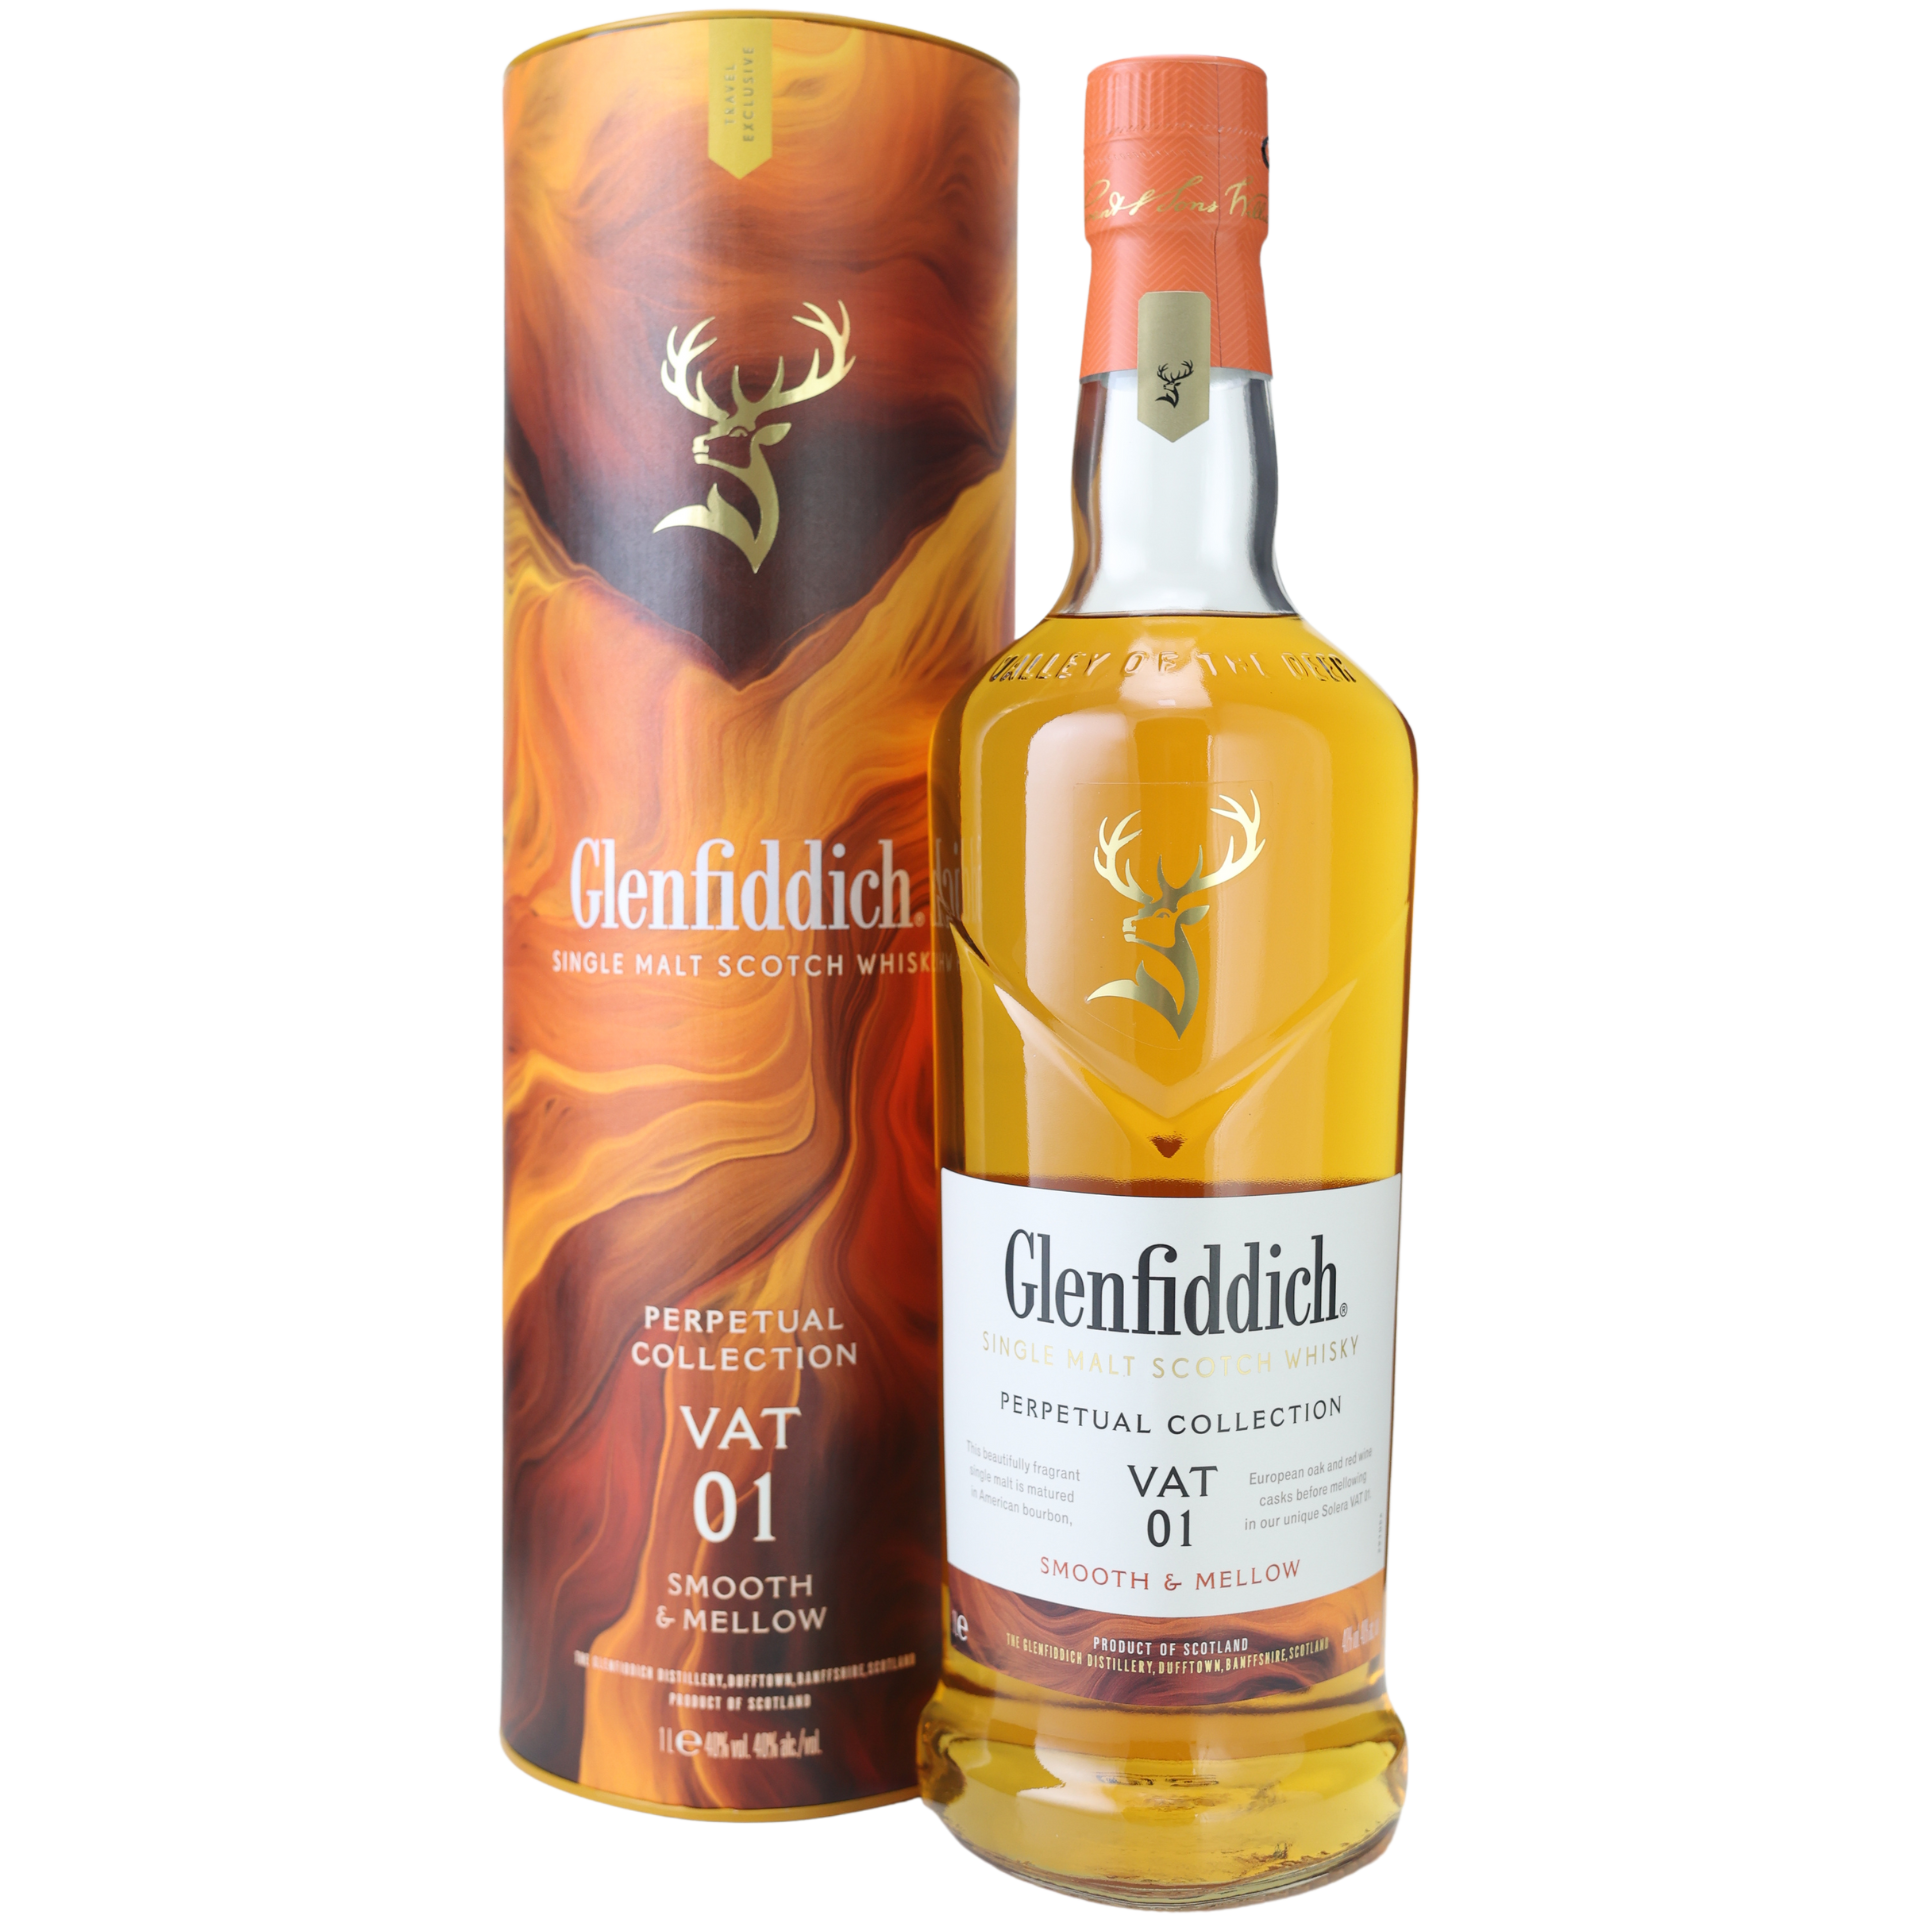 Glenfiddich VAT 01 Perpetual Collection Whisky 40% 1,0l